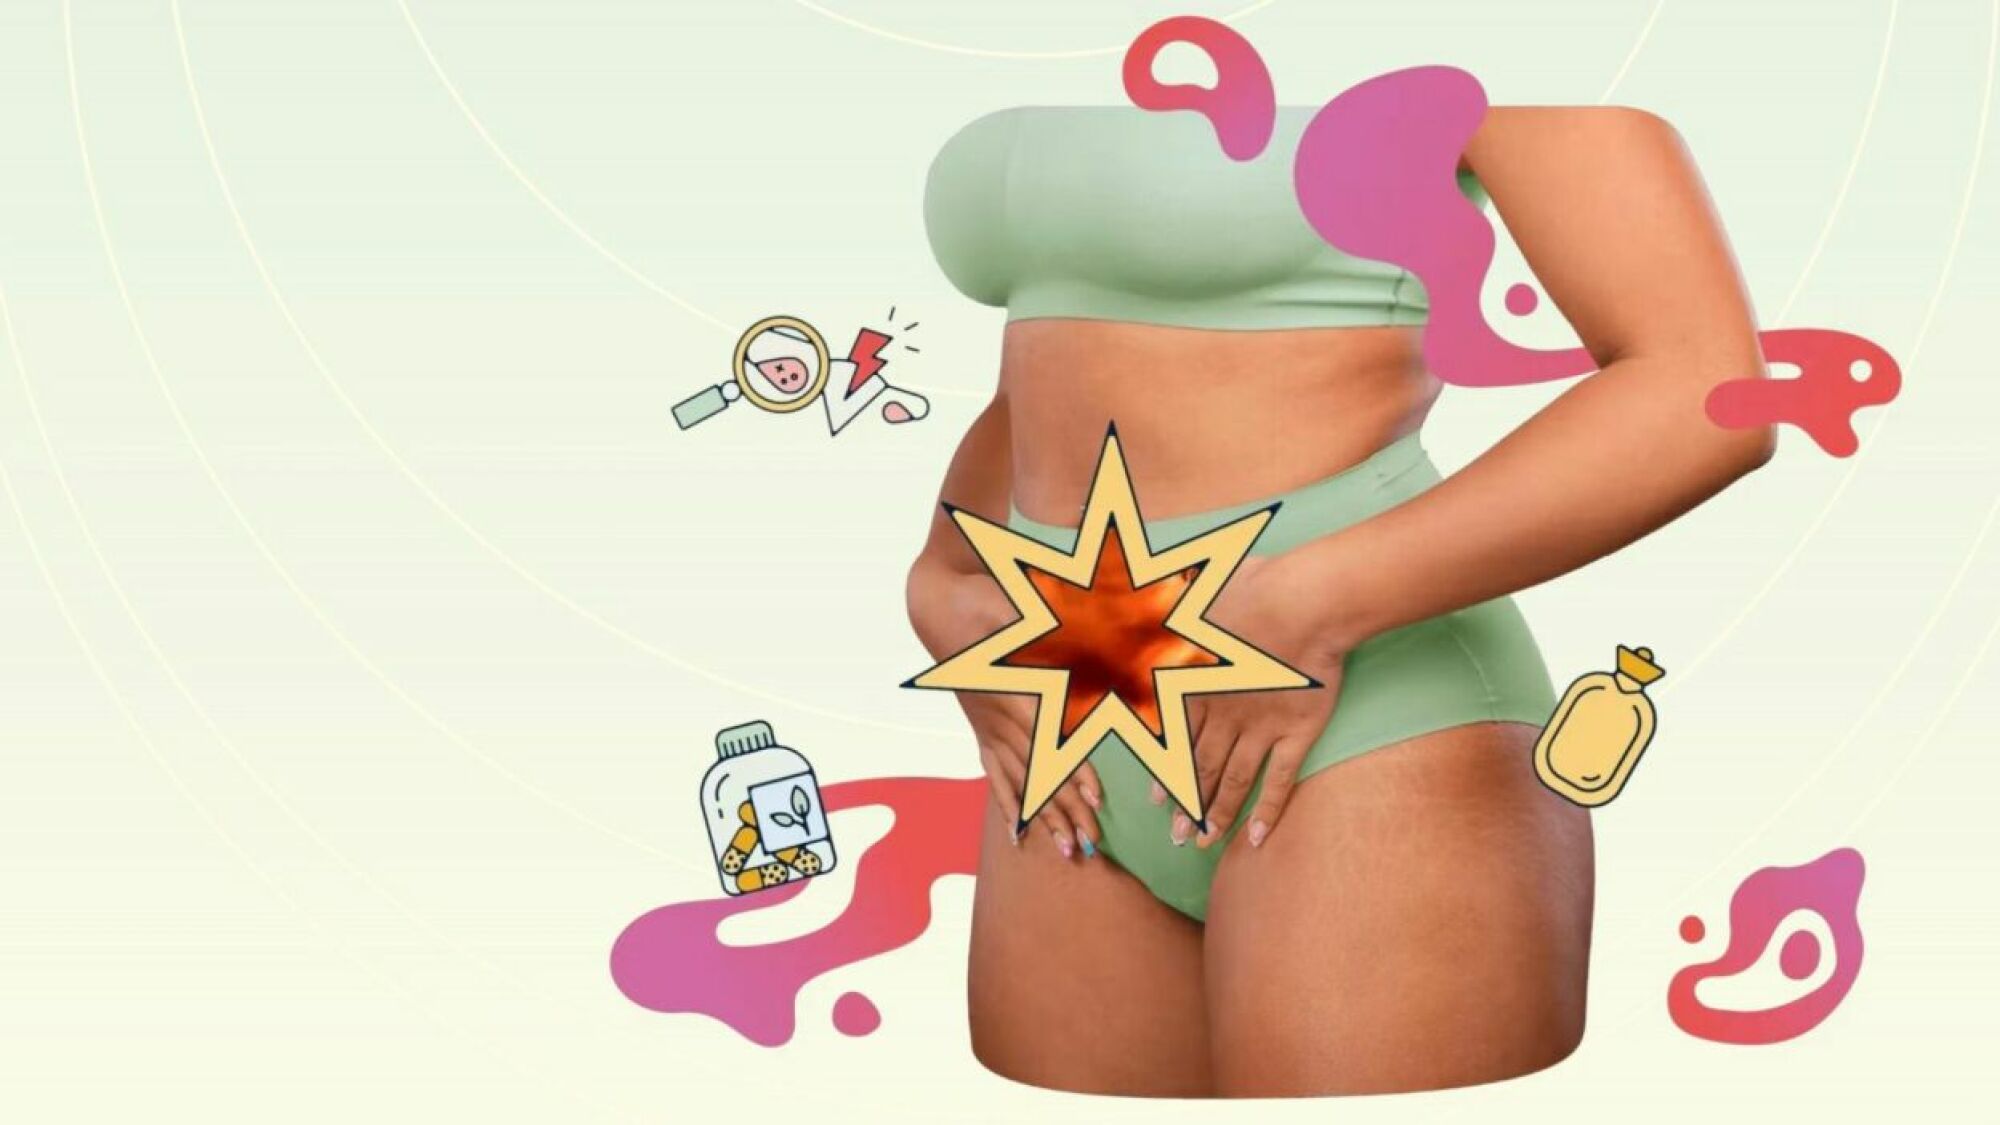 An image of a woman in underwear holding her lower stomach, animated with illustrations to evoke period pain.